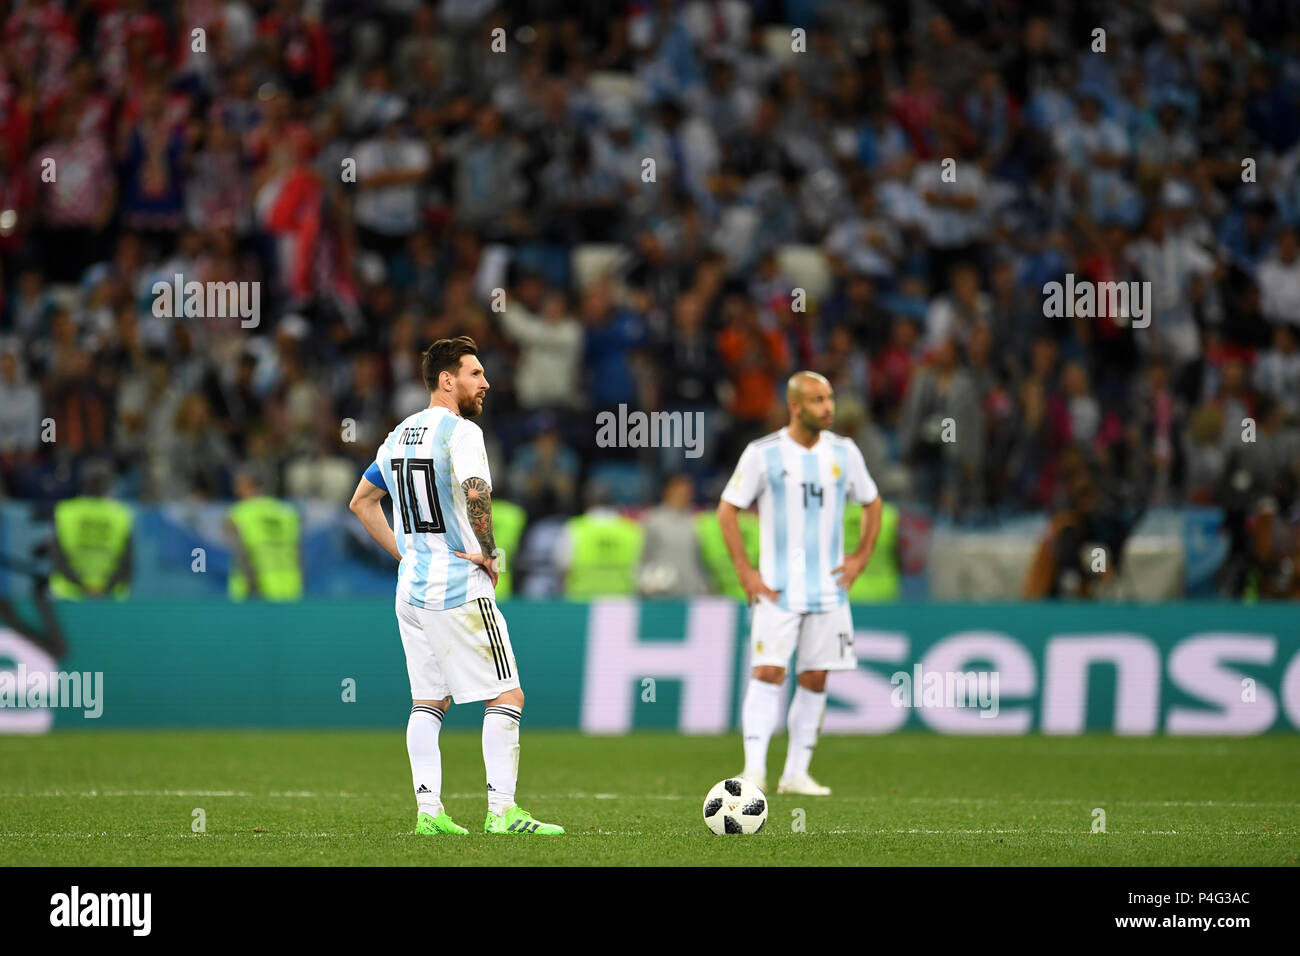 Nizhny Novgorod, Russia. 21st June, 2018. World Cup, Argentina vs Croatia, preliminary round, Group D, 2nd match day in the Nizhny Novgorod Stadium. Lionel Messi (L) and Javier Mascherano from Argentina in the field after conceding the opening goal. Credit: Andreas Gebert/dpa/Alamy Live News Stock Photo